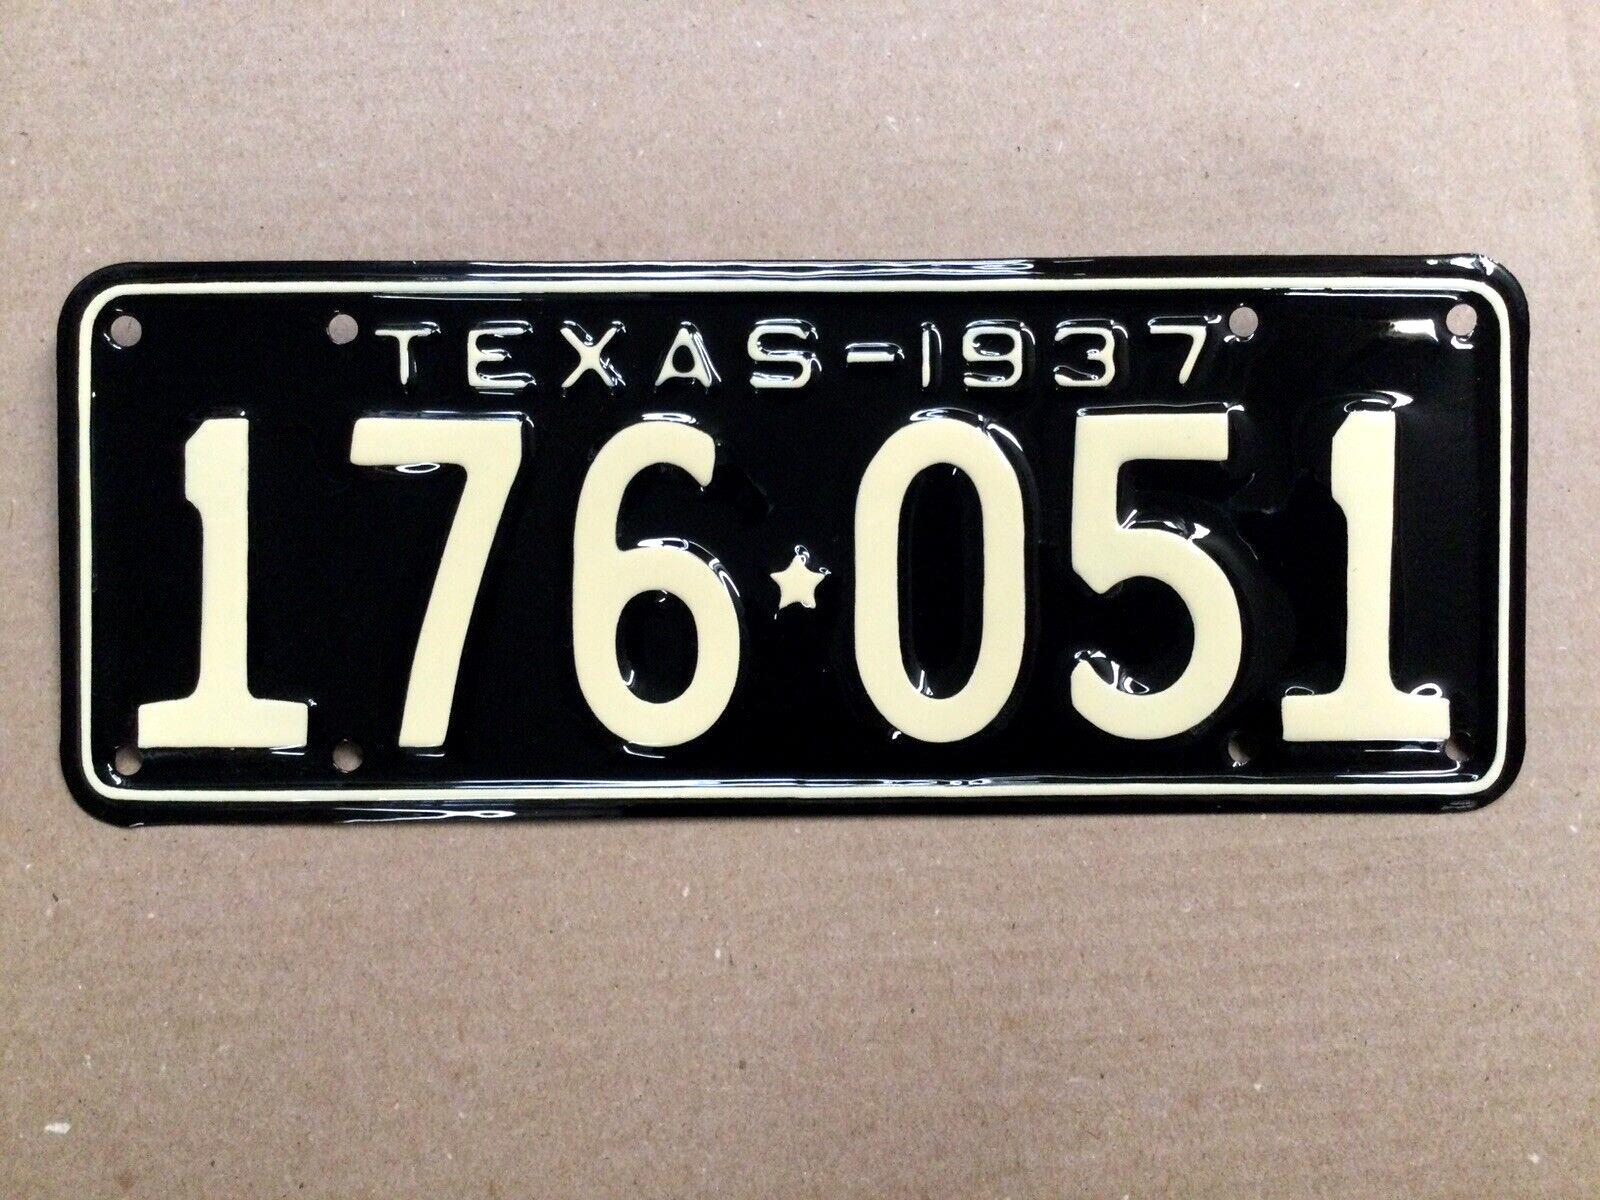 VINTAGE 1937 TEXAS TX. LICENSE PLATE VERY NICELY RESTORED HIGH QUALITY 176 051